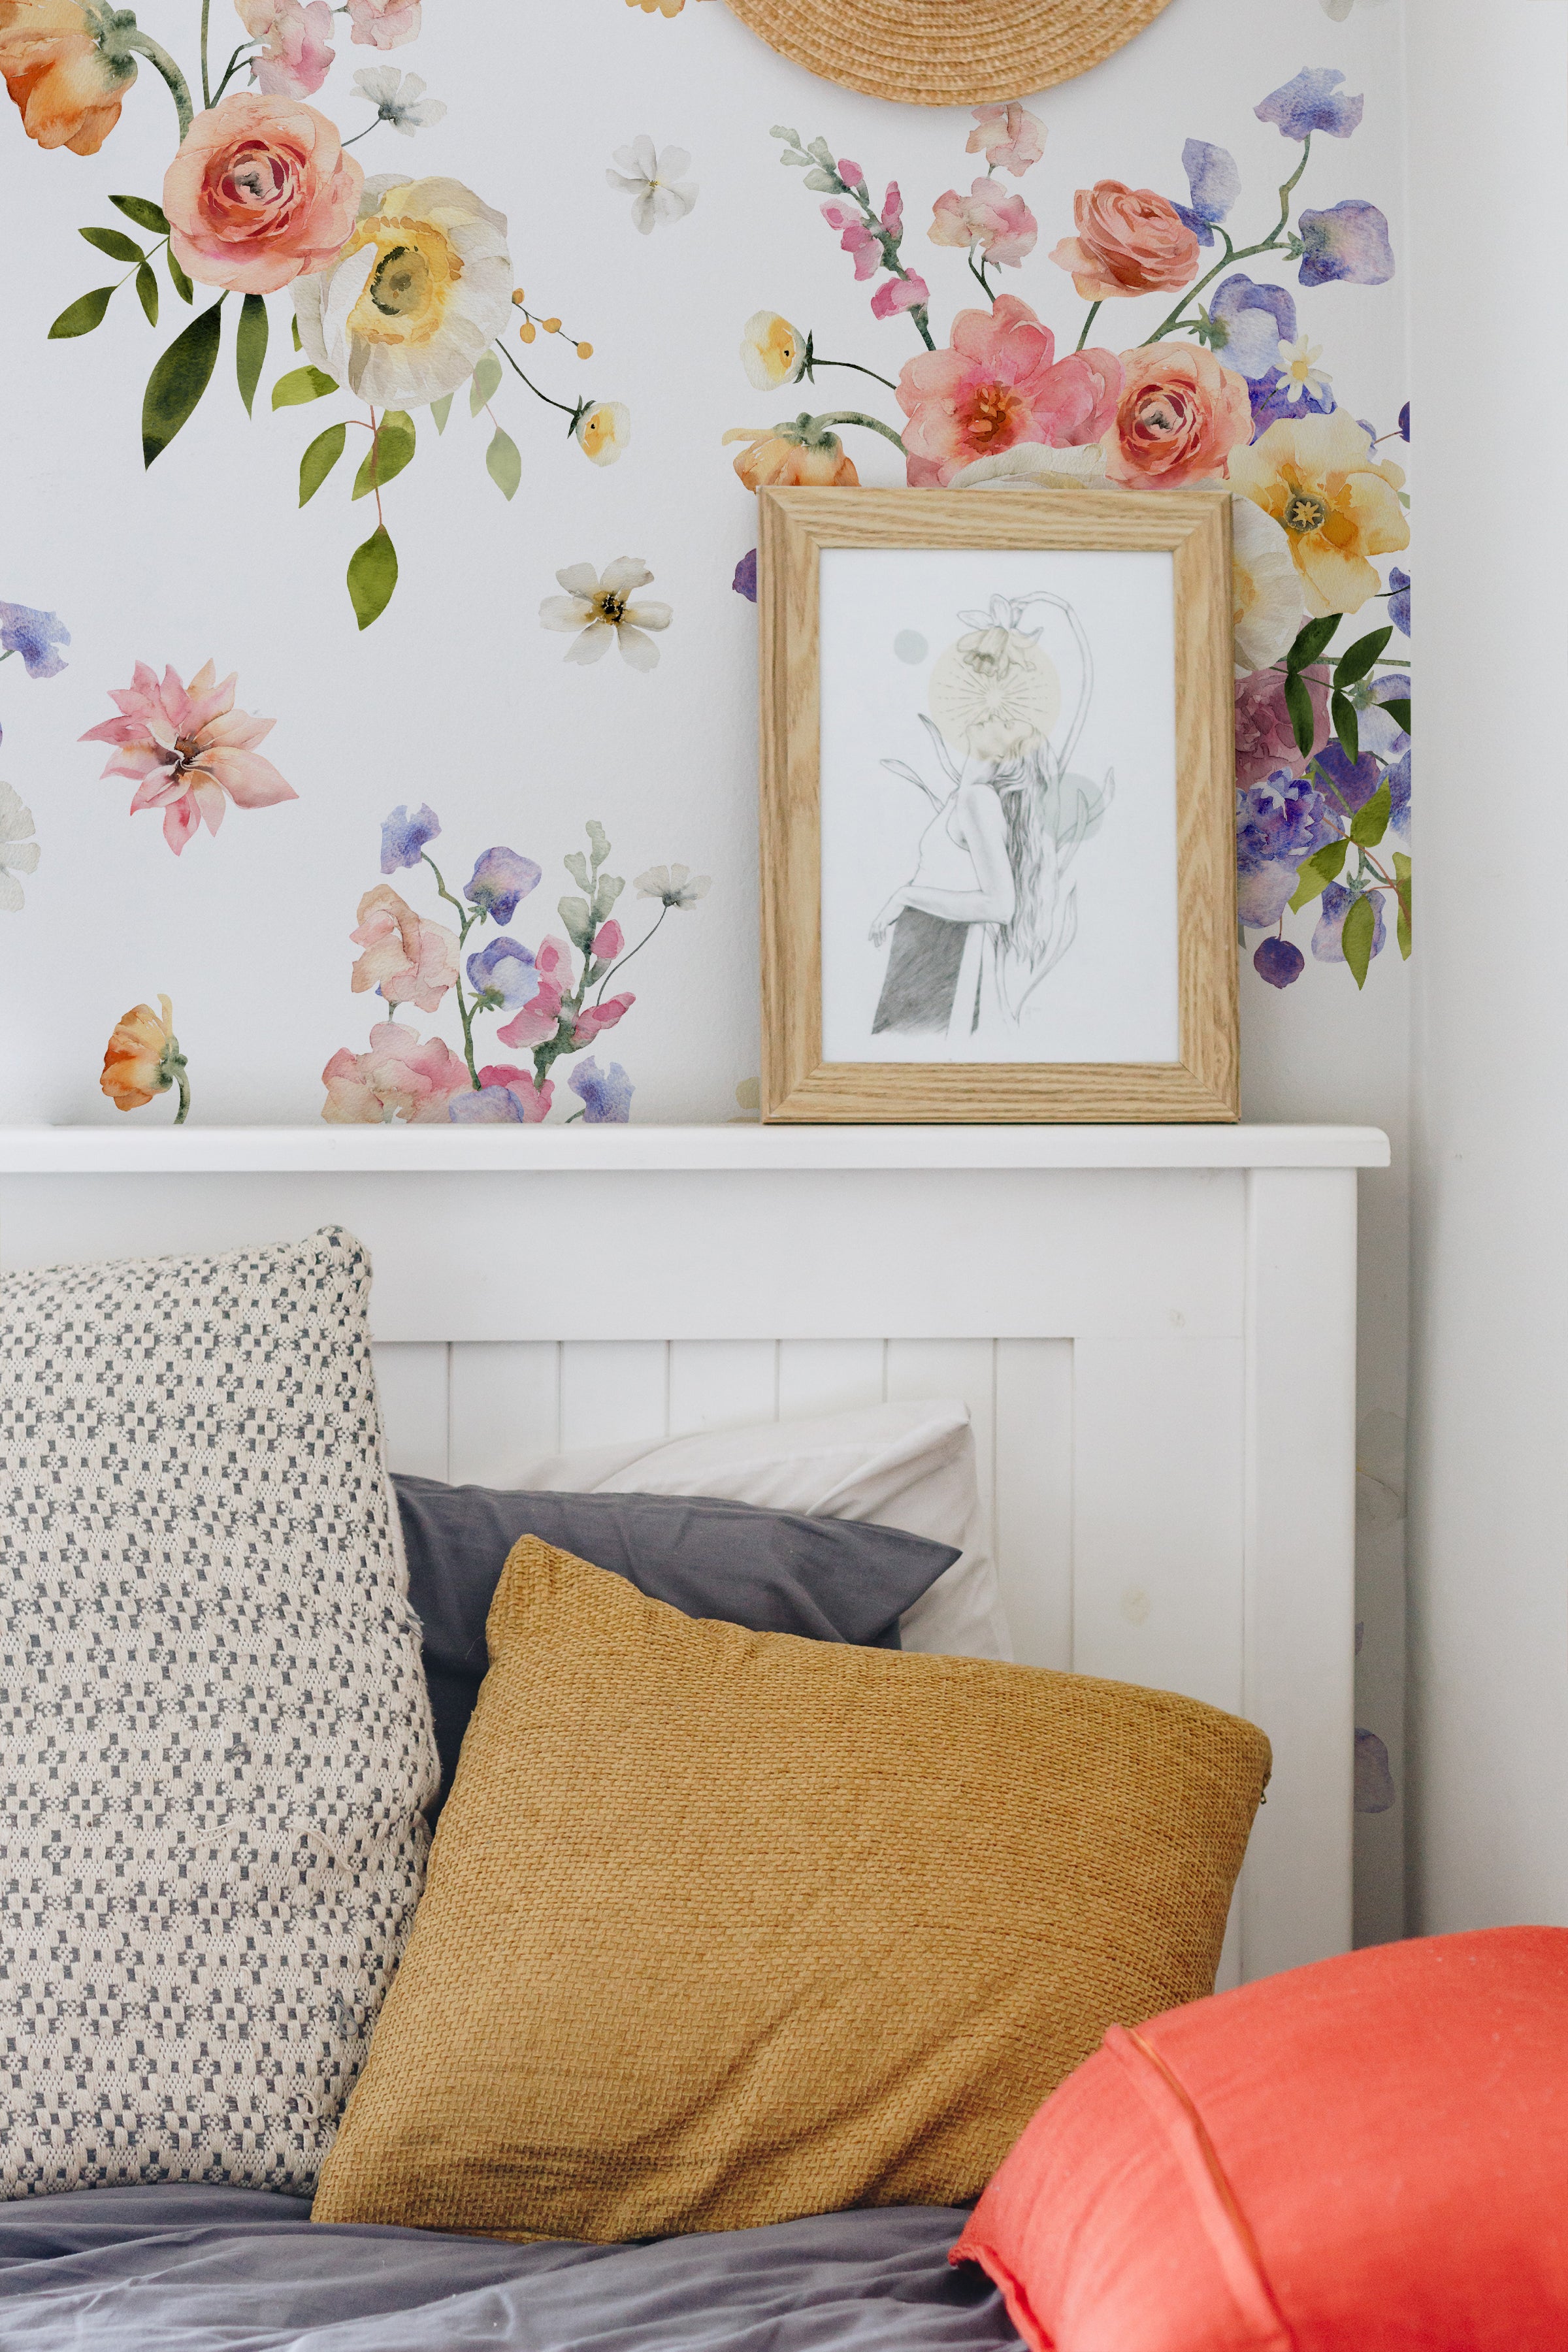 A cozy corner of a bedroom showcasing the Bouquet Bliss Wallpaper. This intimate space is styled with a rustic wooden headboard and a mix of colorful pillows. The wallpaper's floral pattern adds a fresh and whimsical touch to the room, complementing the simple and warm bedding